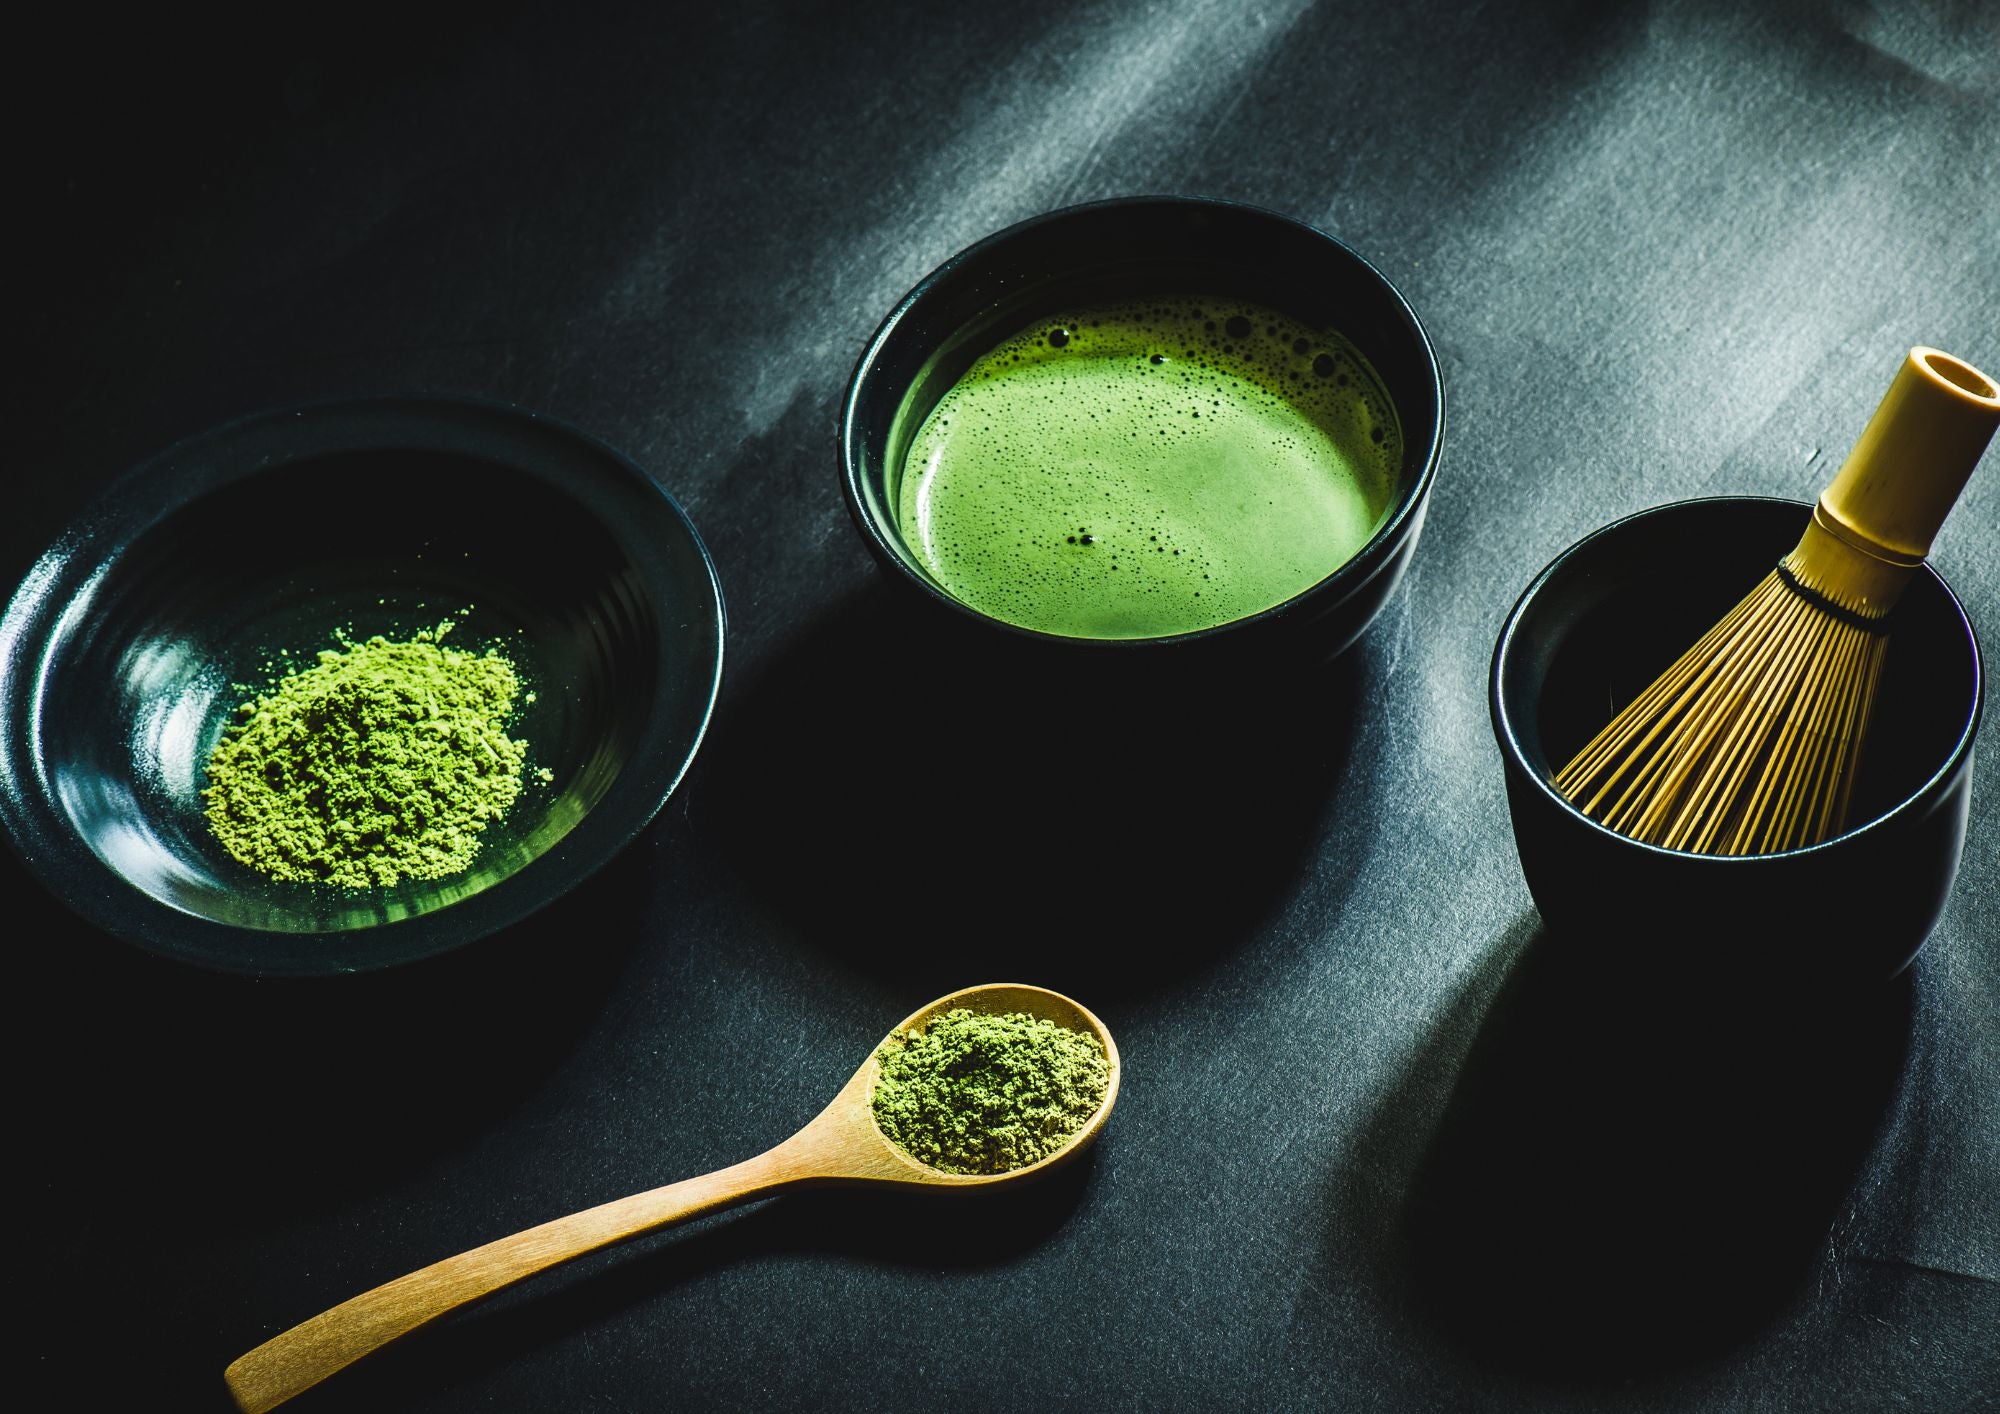 What are the benefits of matcha?